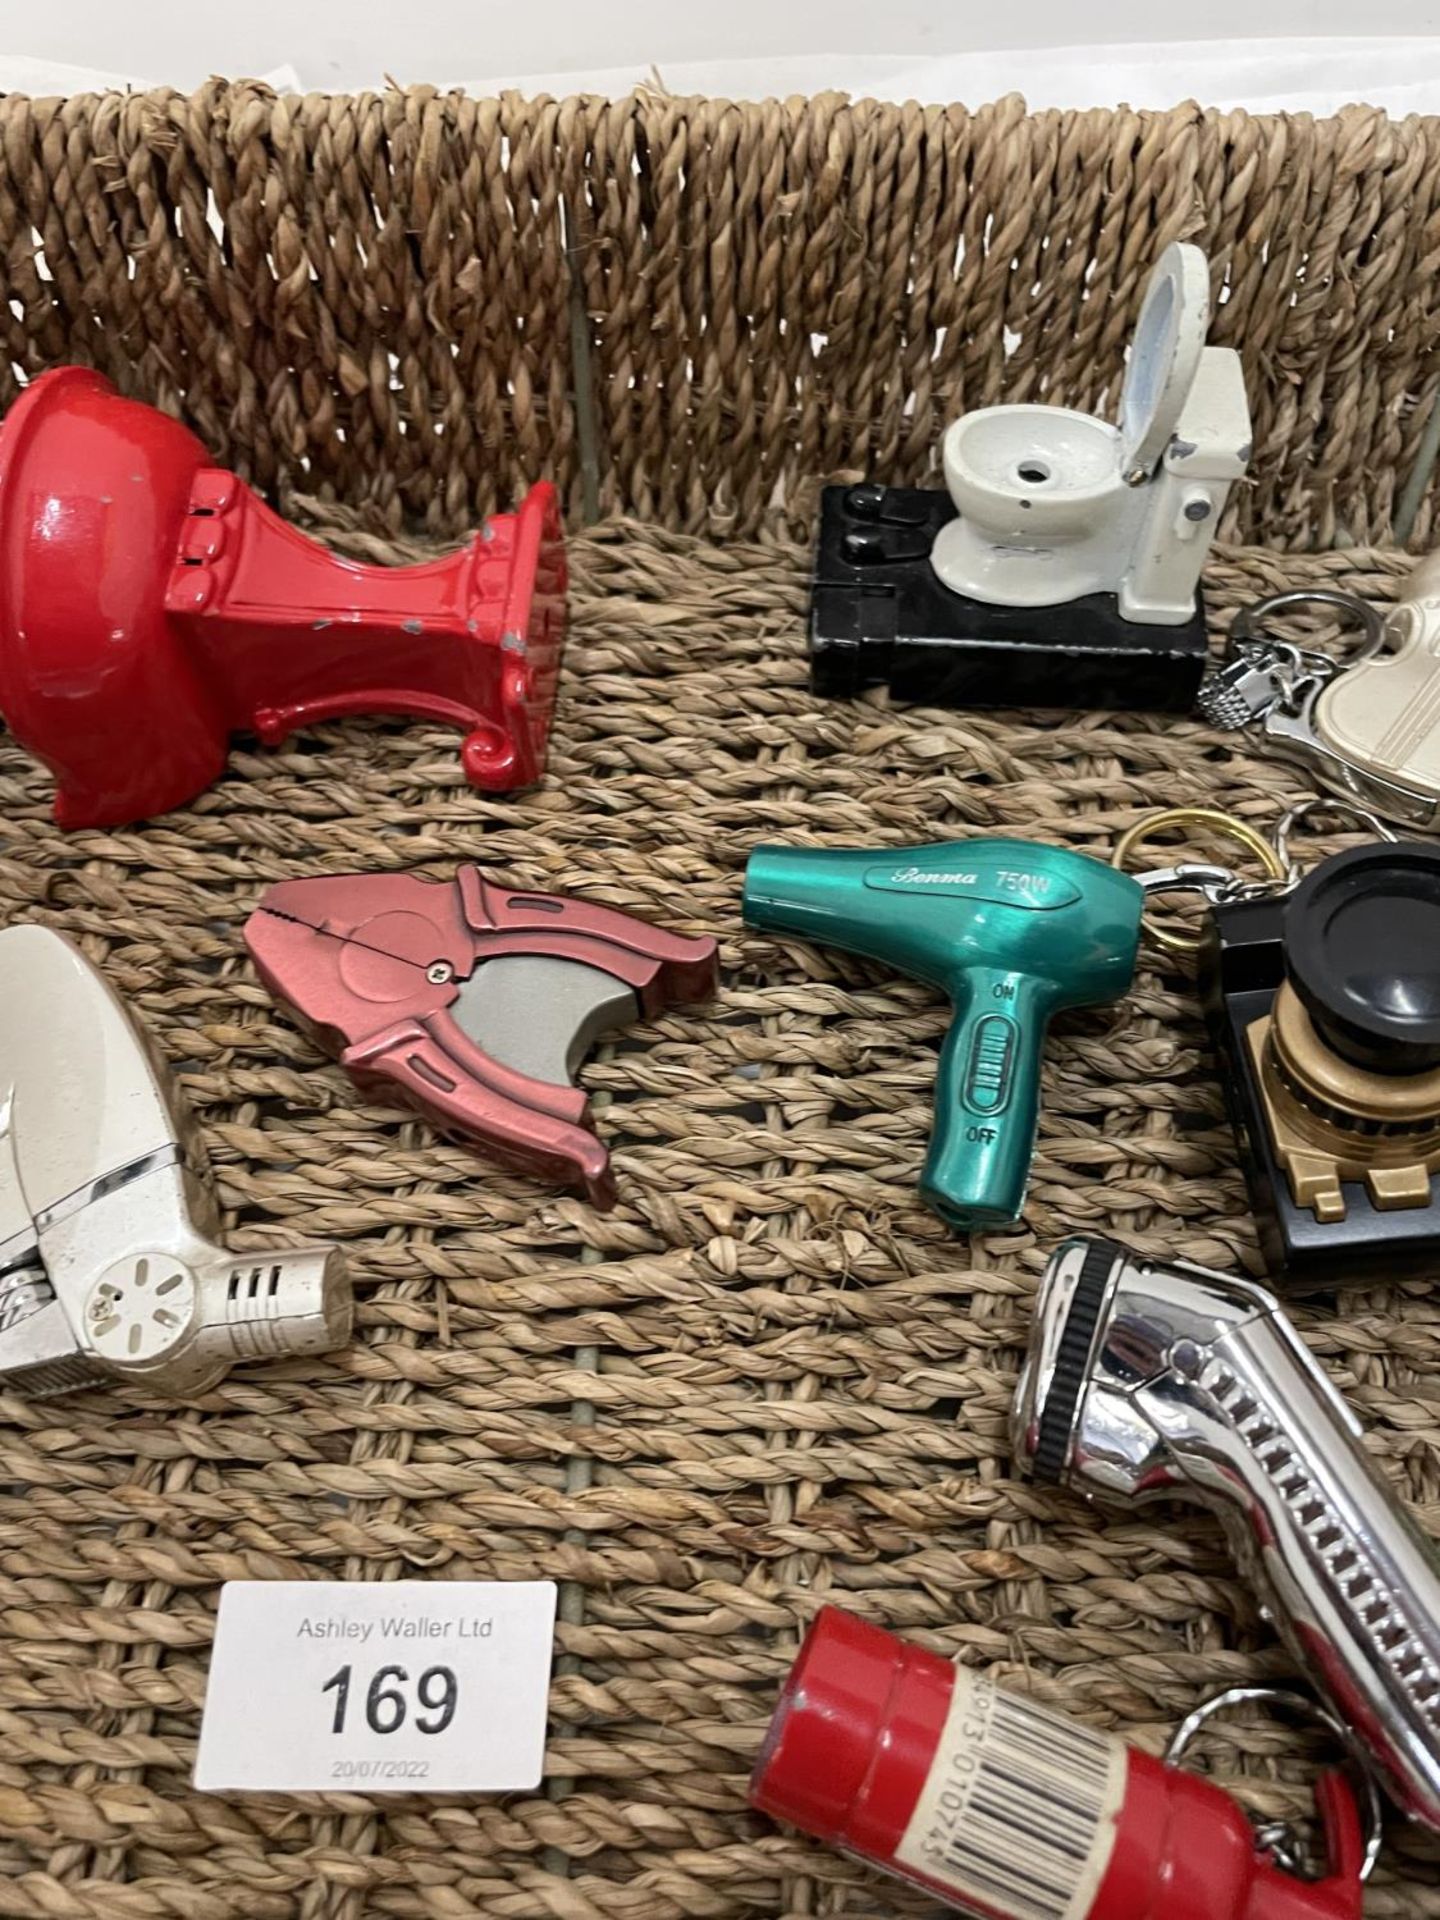 A QUANTITY OF NOVELTY LIGHTERS TO INCLUDE HAIRDRYER, TOILET, SHAVER, ETC - Image 2 of 3